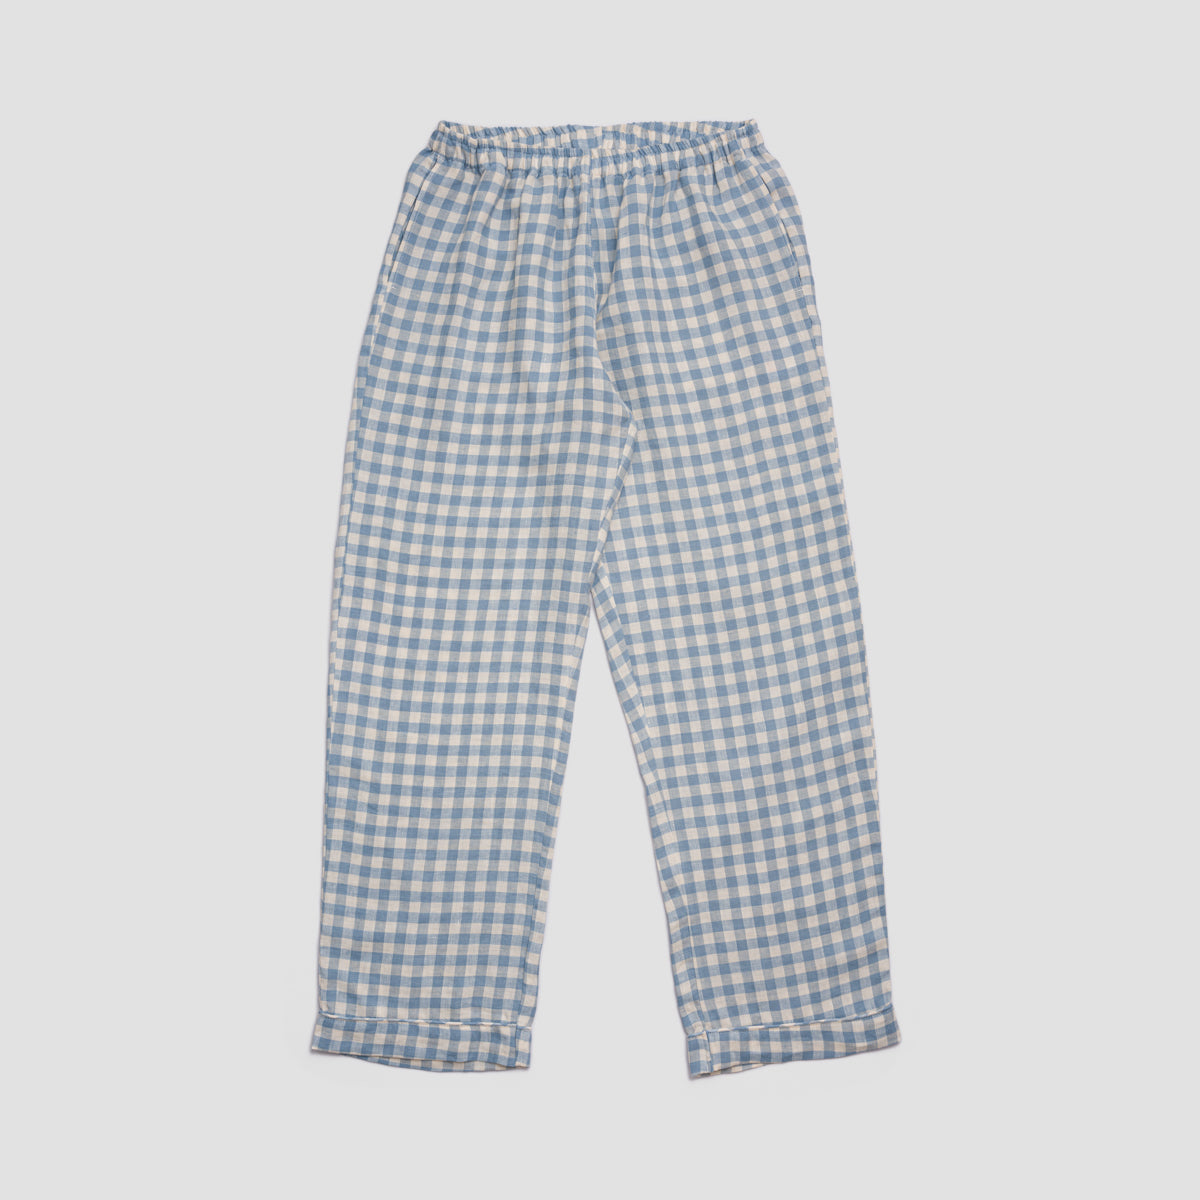 Warm Blue Gingham Linen Pajama Pants | Piglet in Bed US